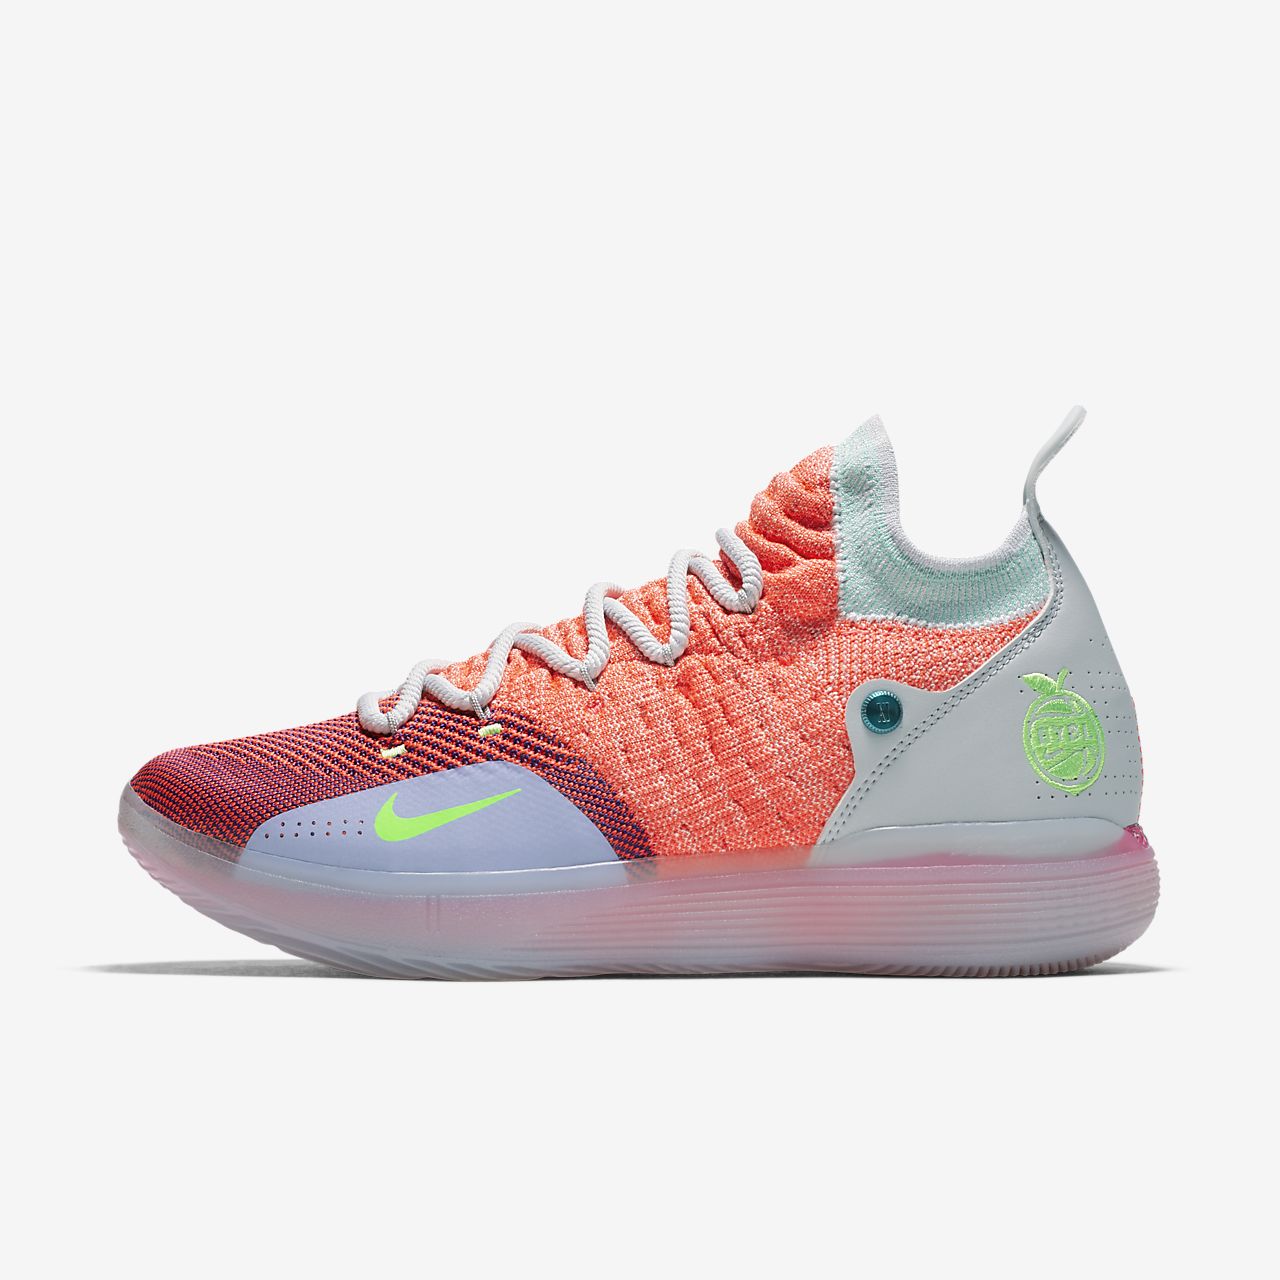 kd 11 basketball Kevin Durant shoes on sale